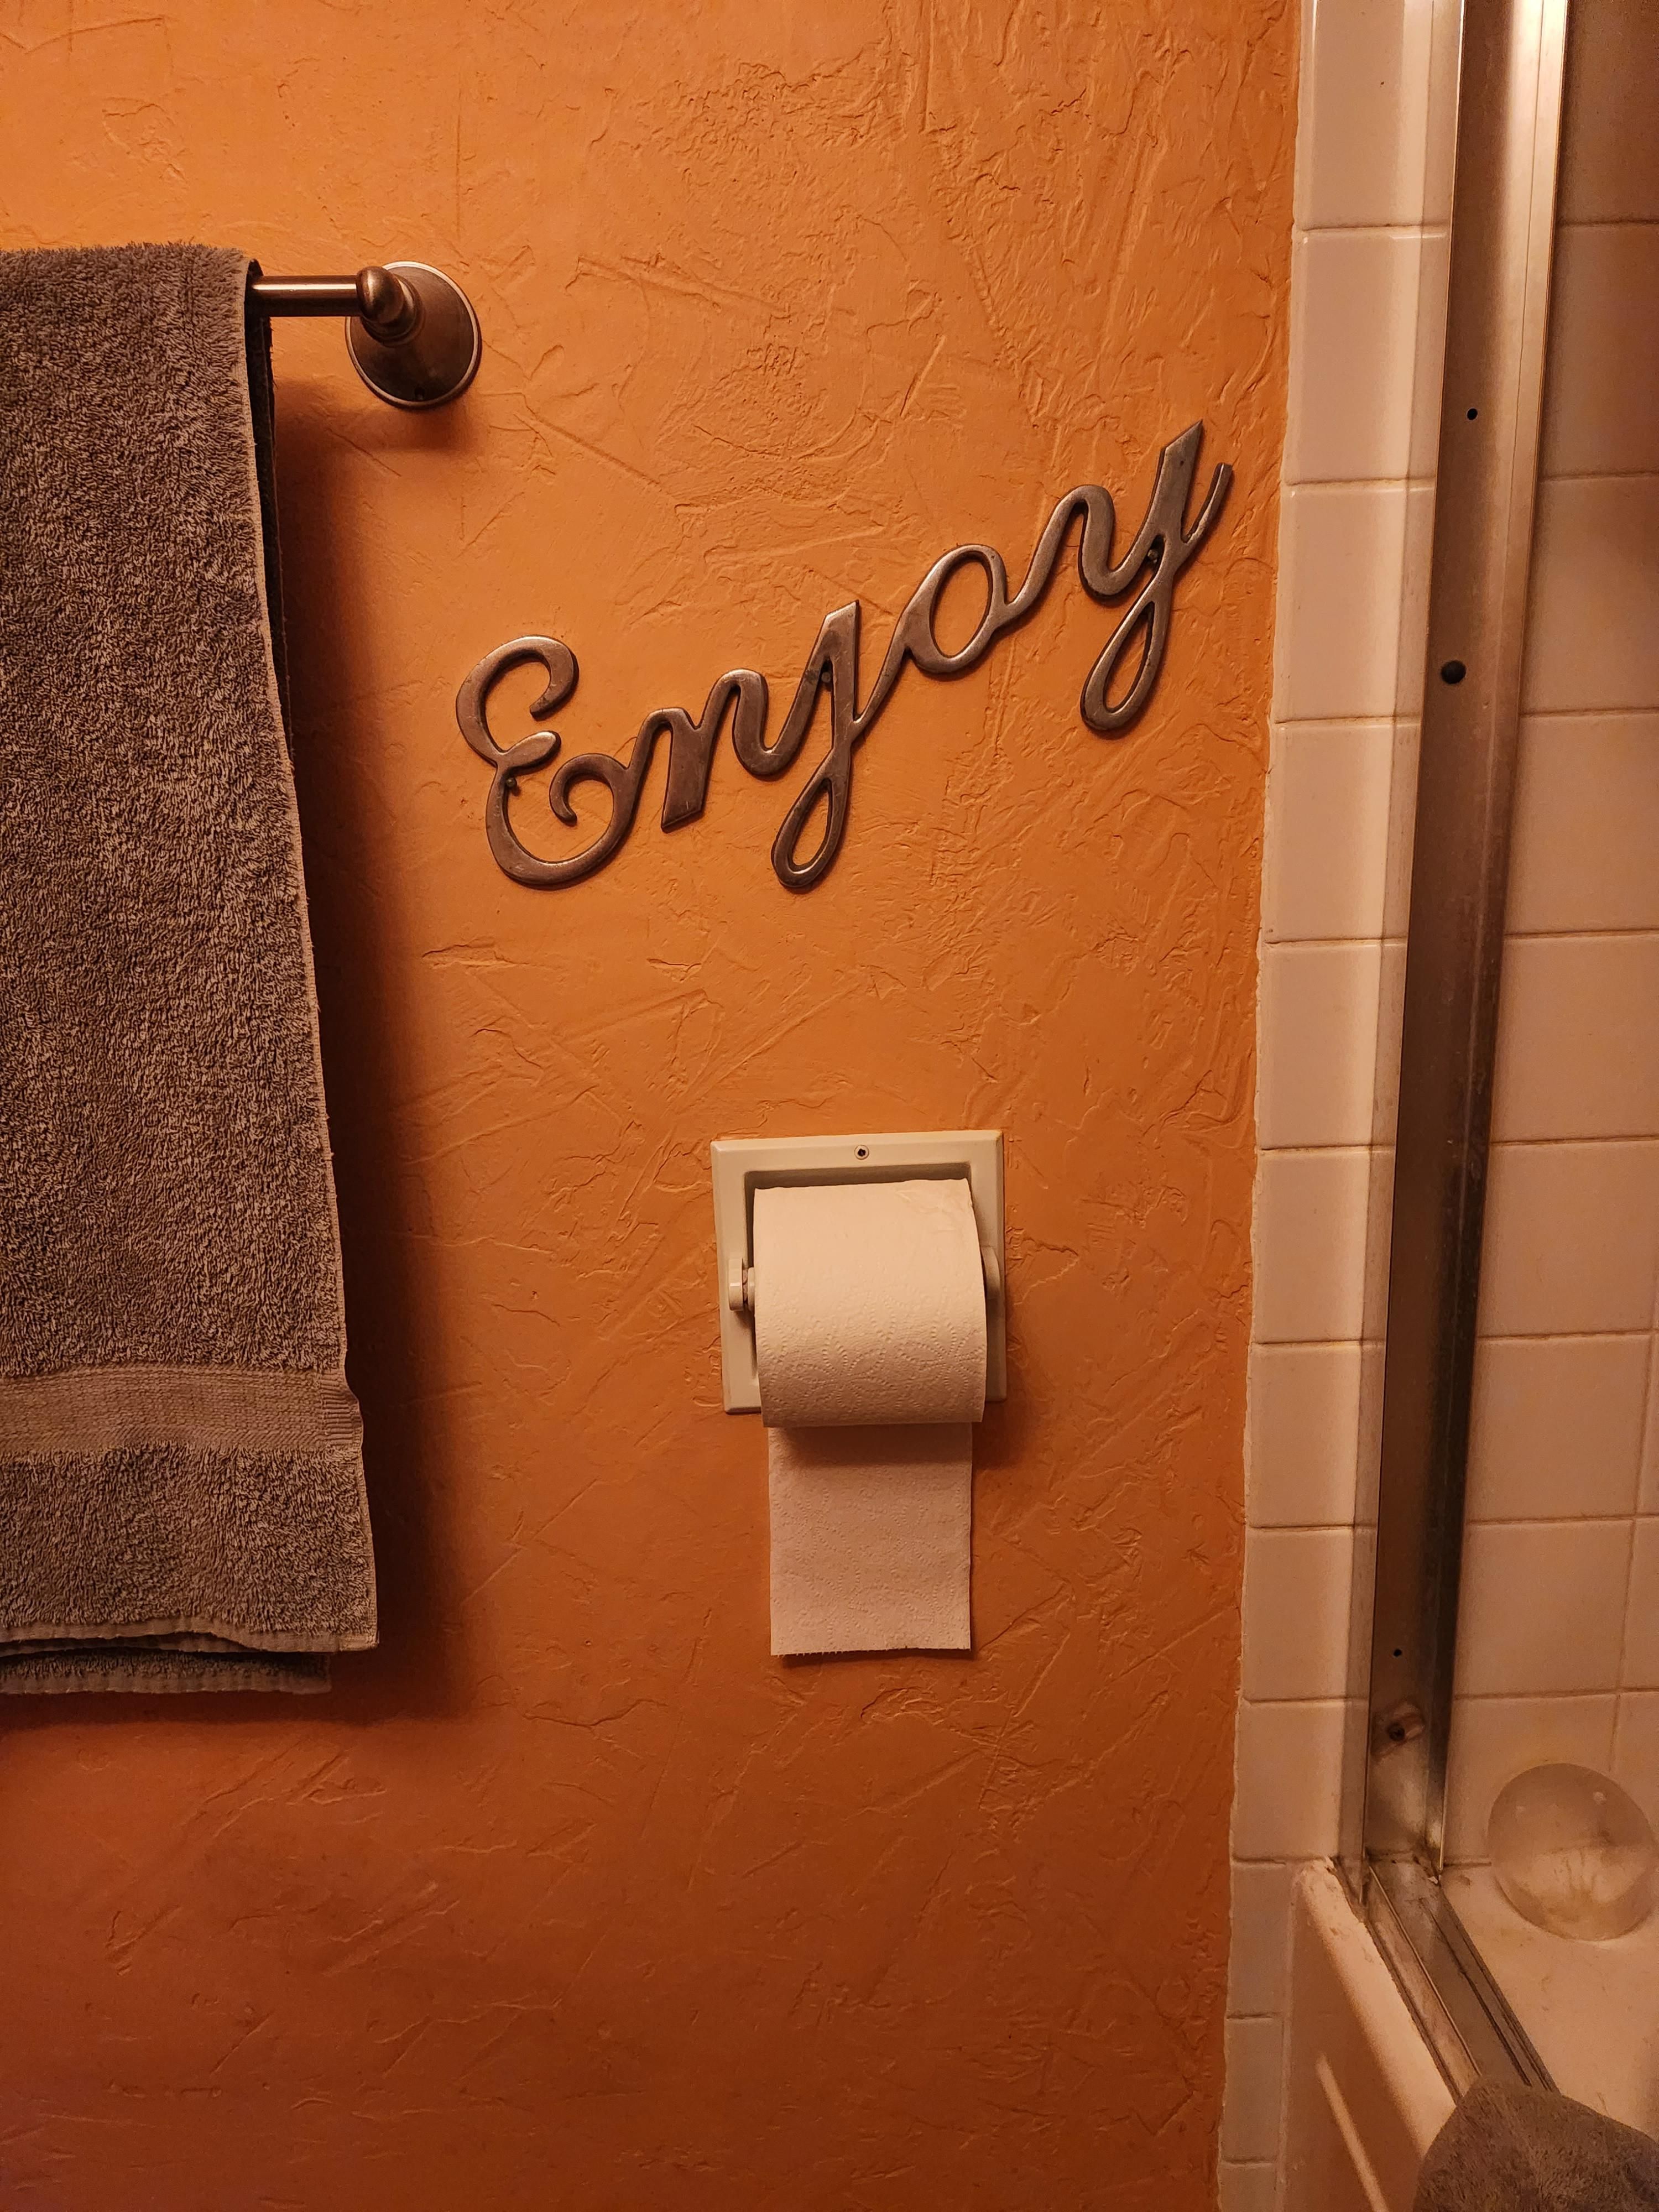 My wife went to the flea market and brought home a wall decoration for the bathroom